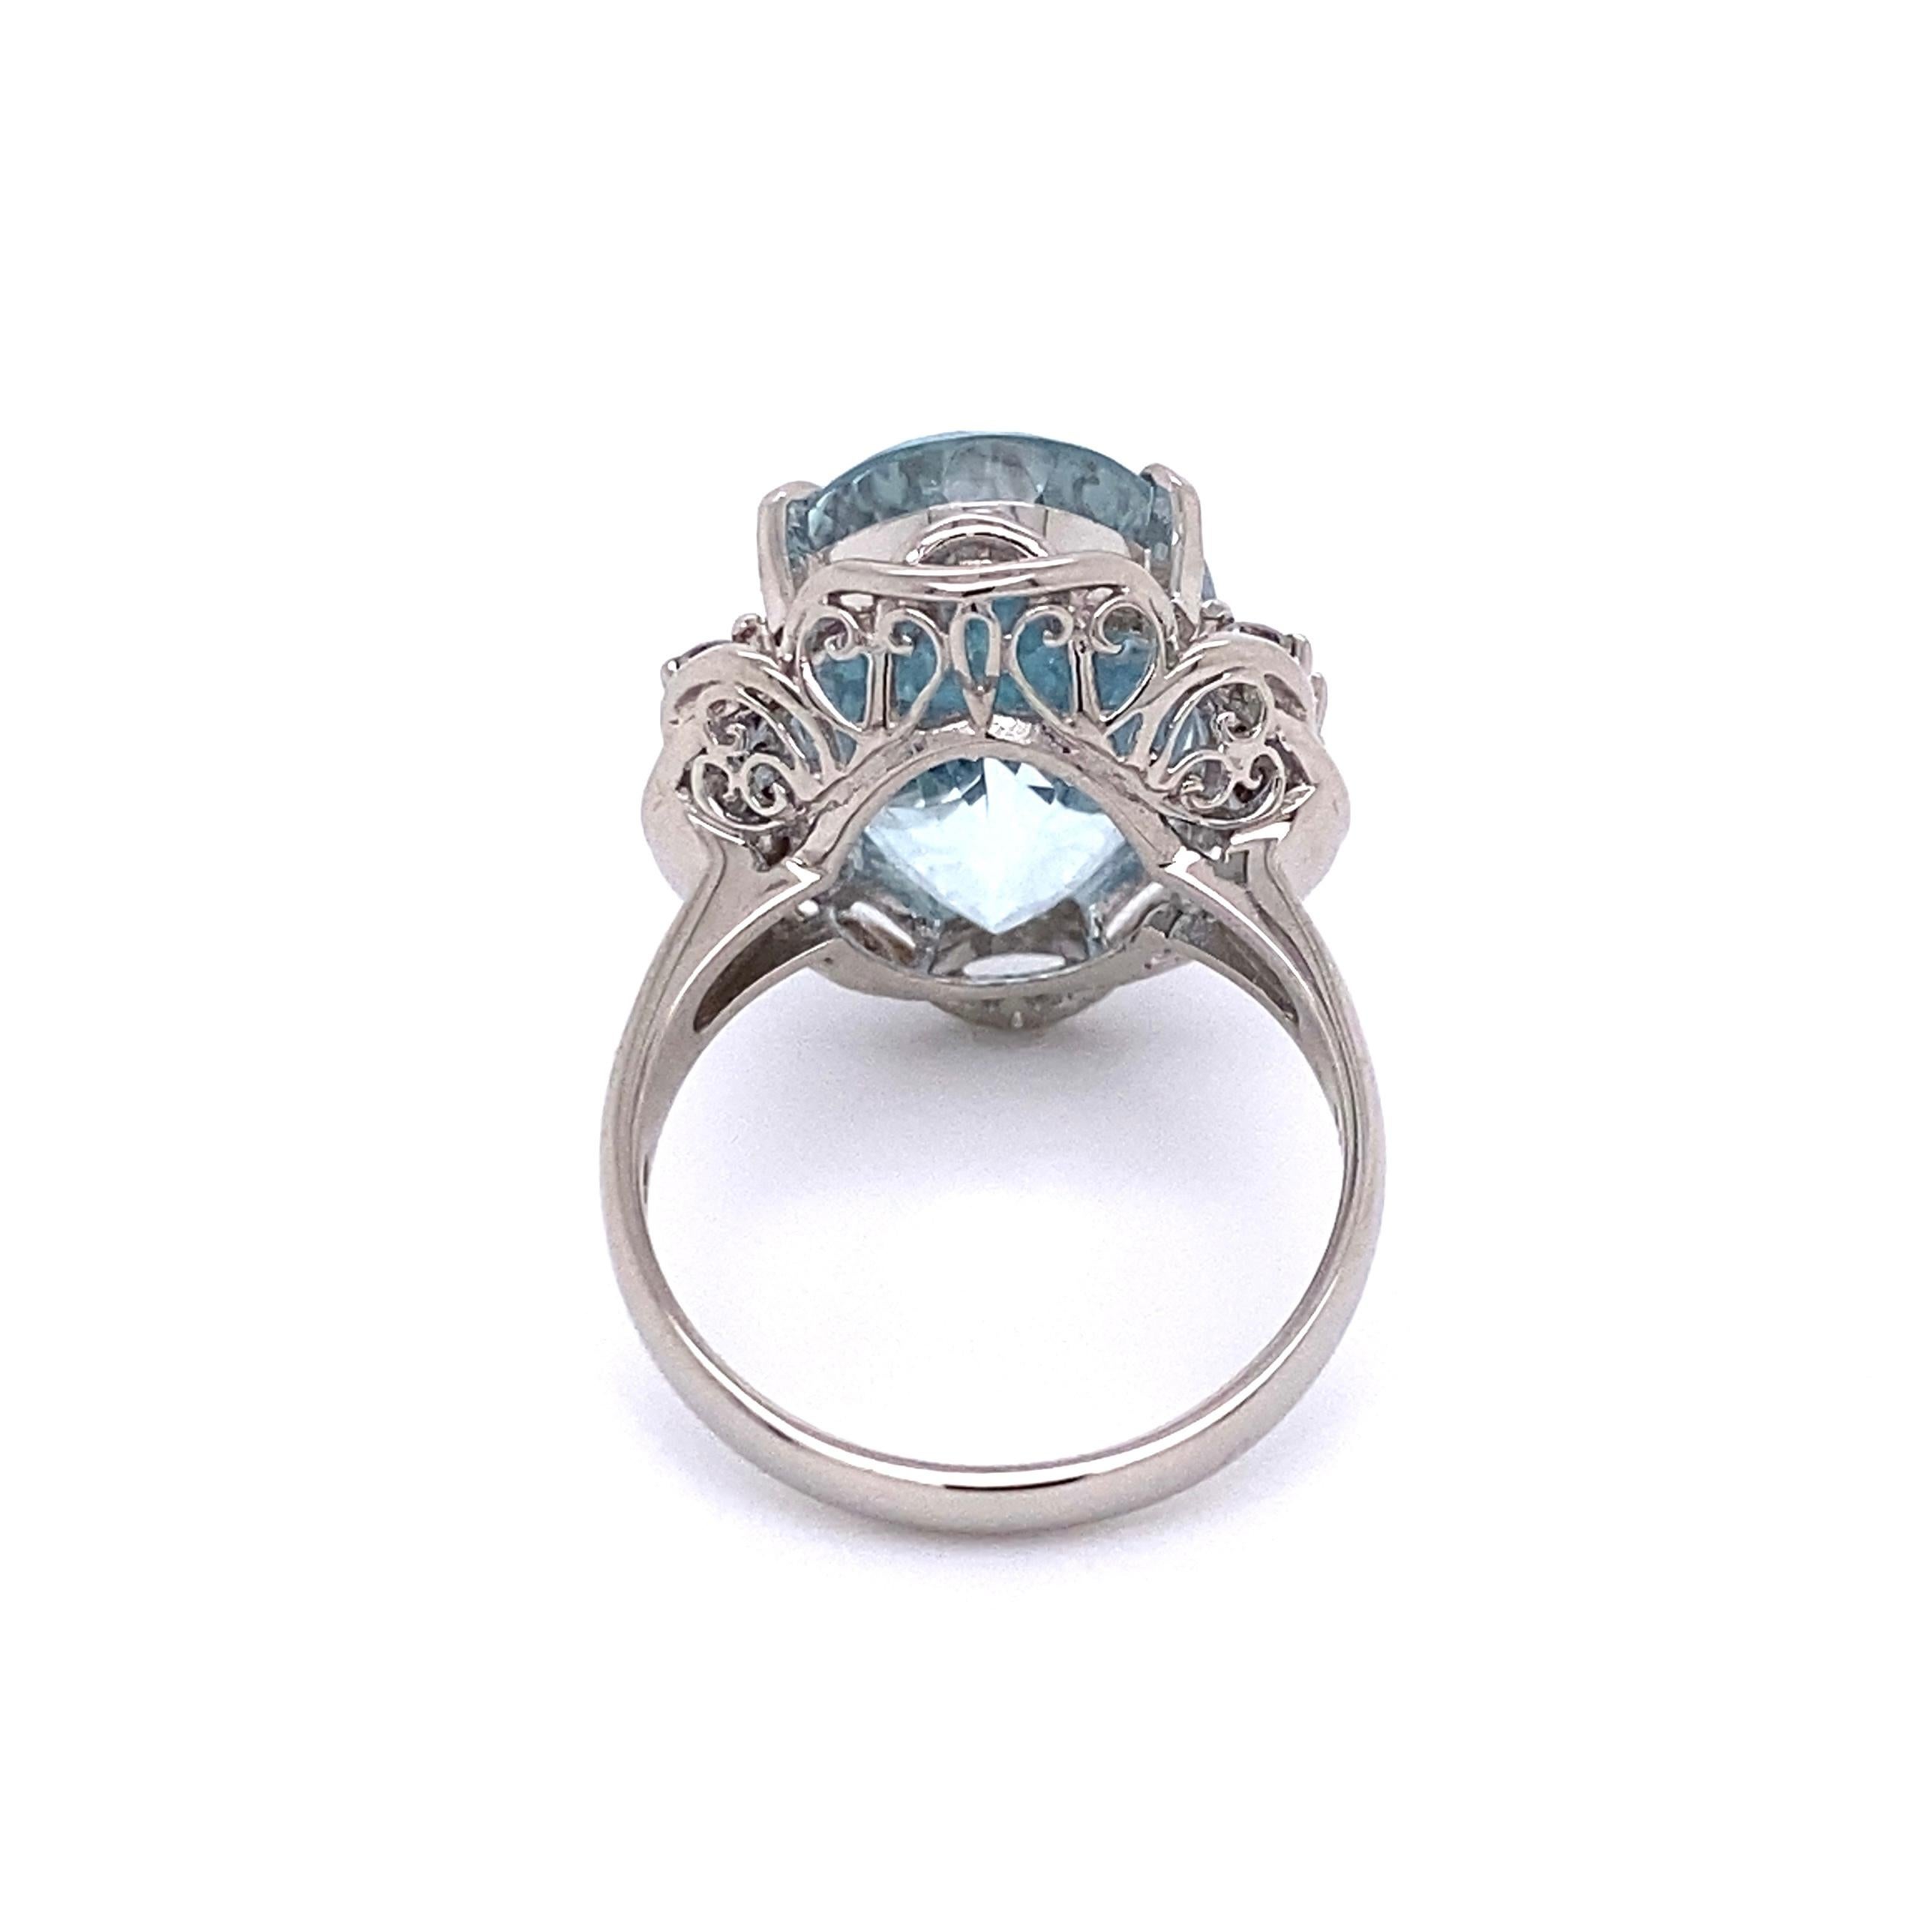 10.92 Carat Aquamarine and Diamond Platinum Cocktail Ring Estate Fine Jewelry In Excellent Condition For Sale In Montreal, QC